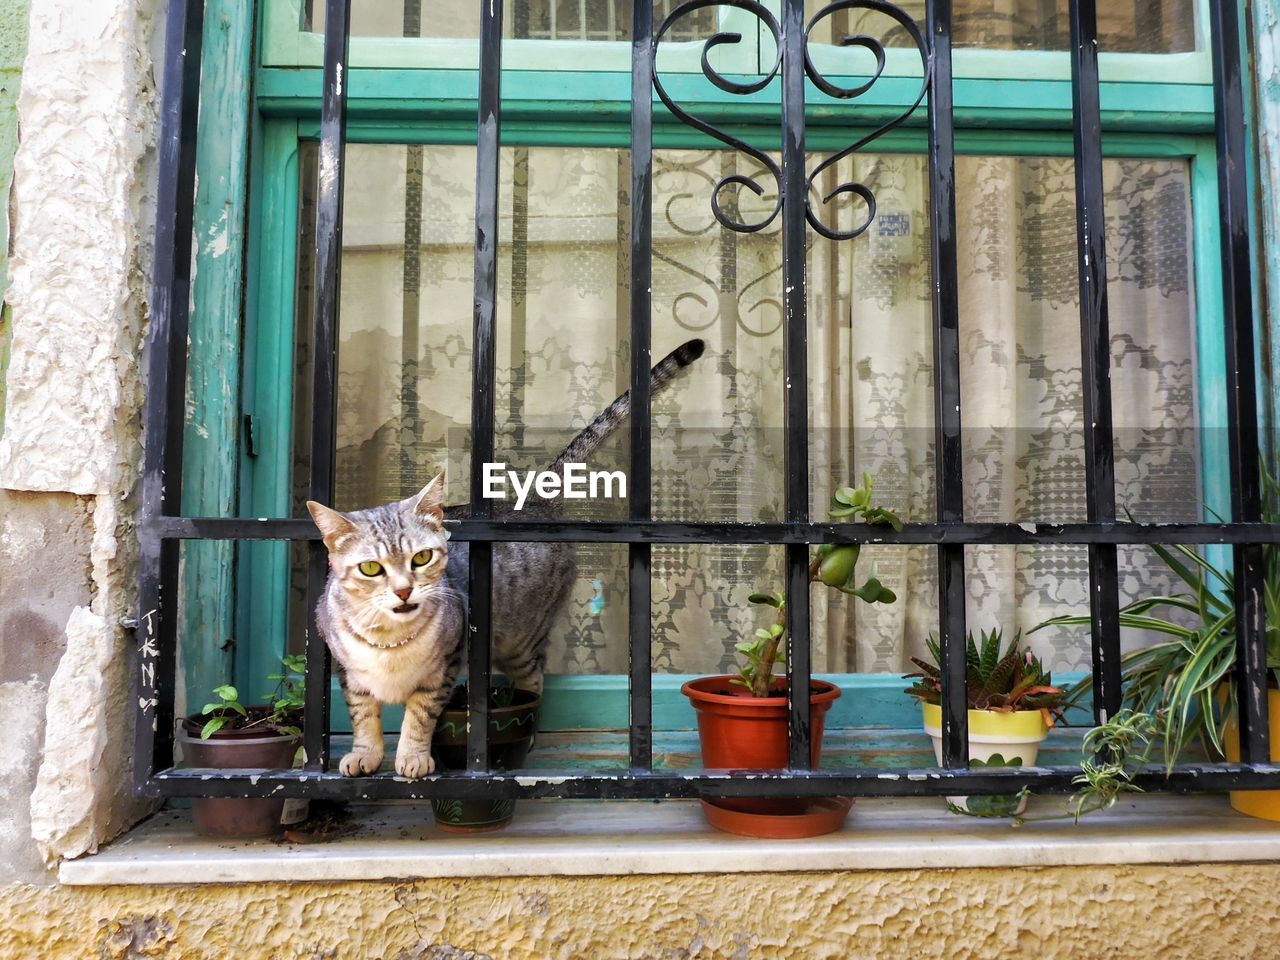 A close up of a cat standing in a window. 